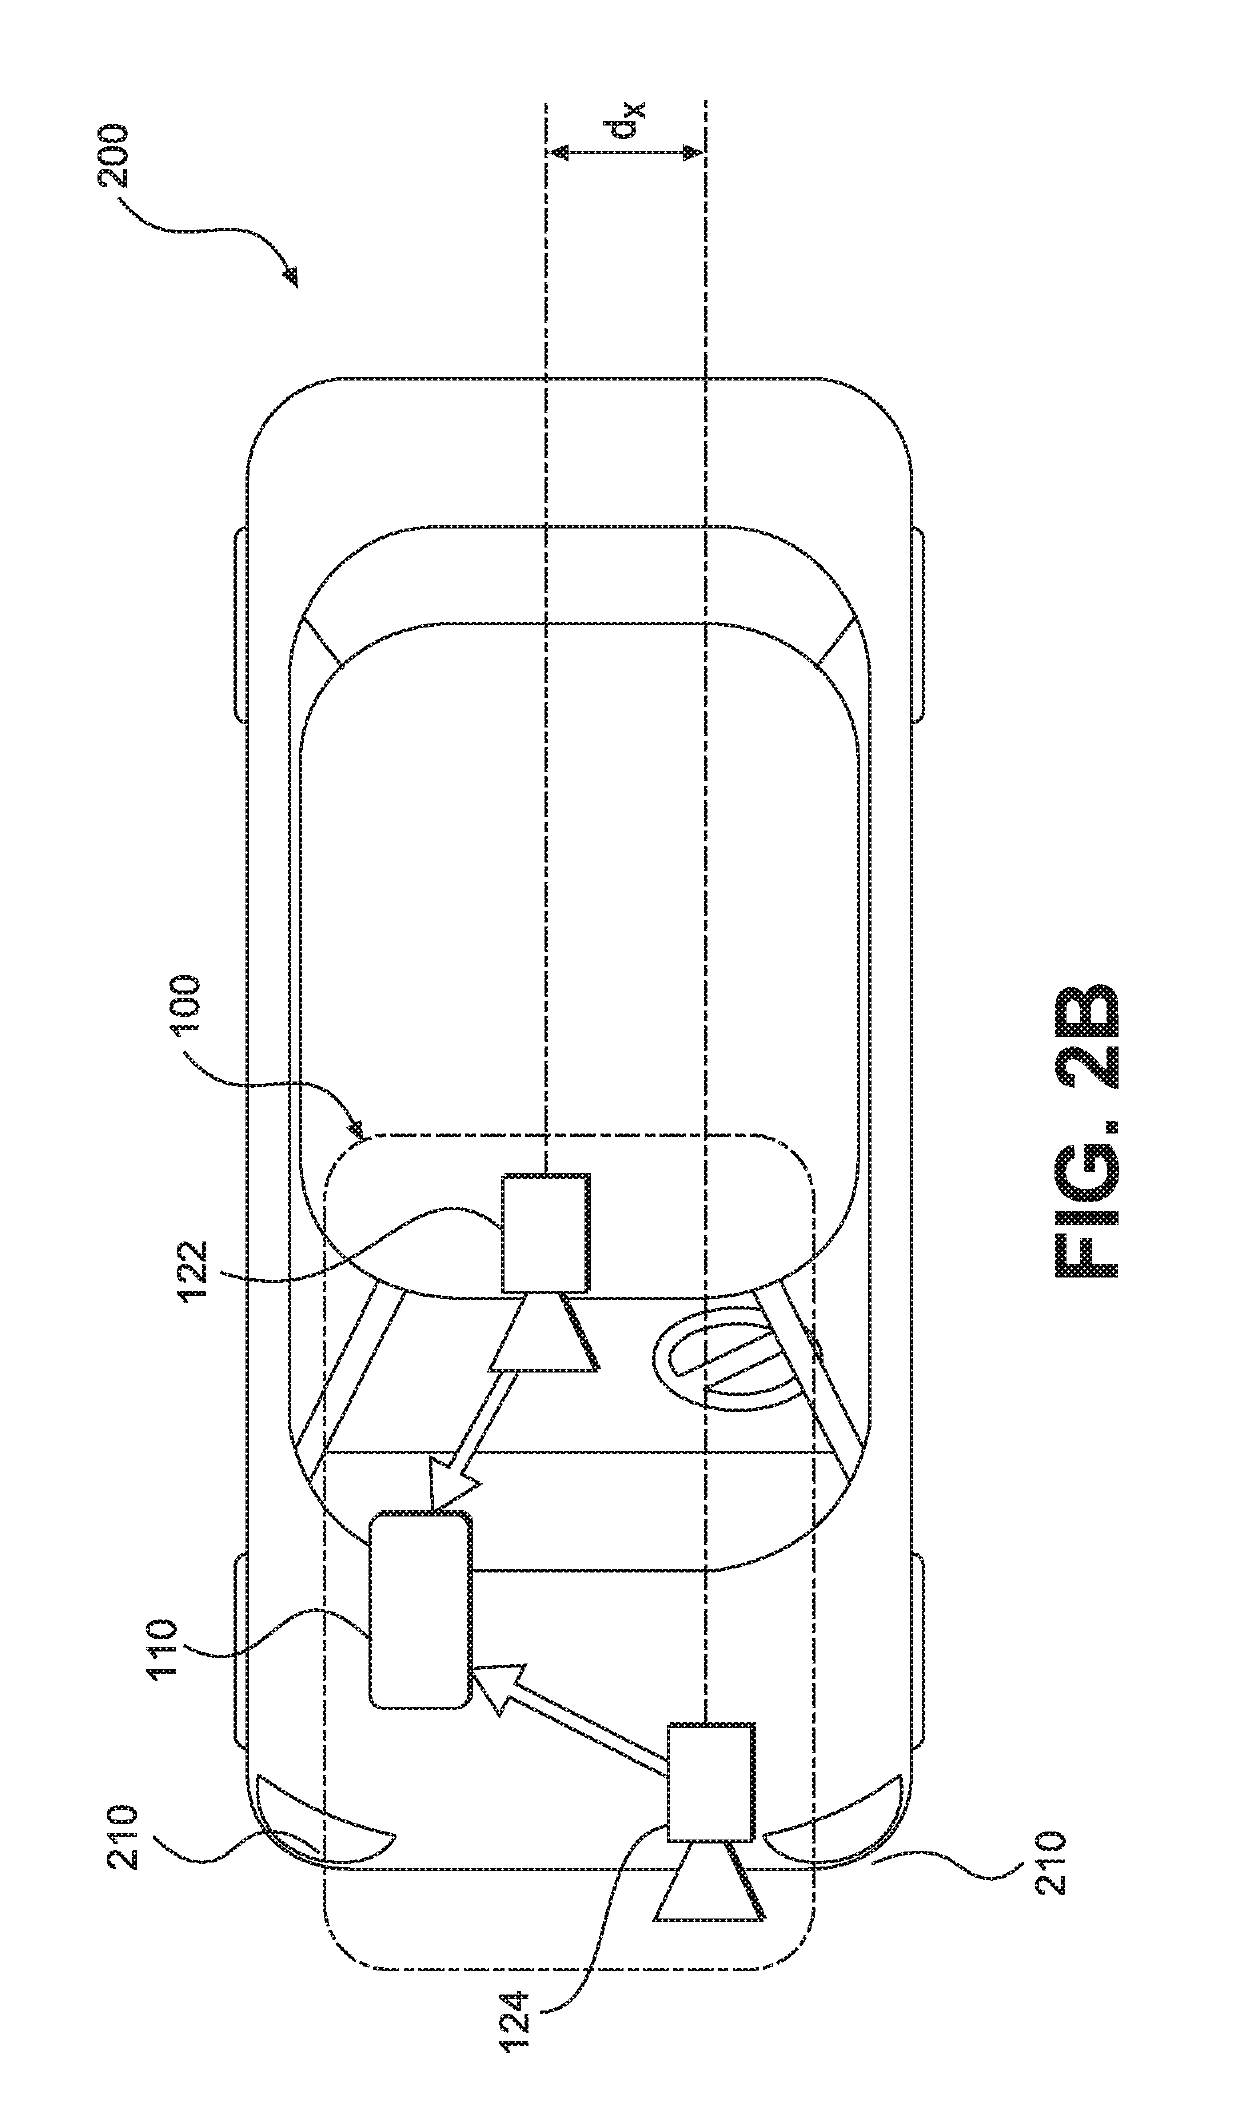 Systems and methods for navigating a vehicle